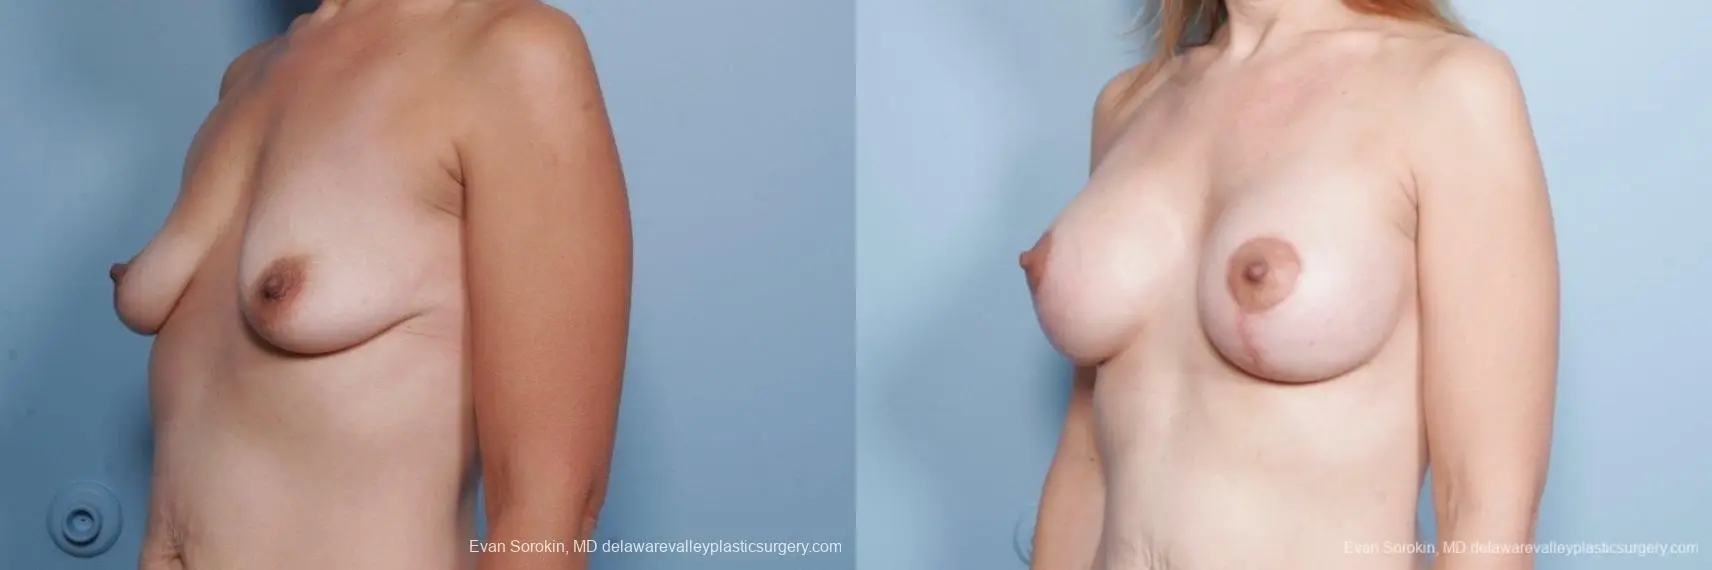 Philadelphia Breast Lift and Augmentation 8685 - Before and After 3